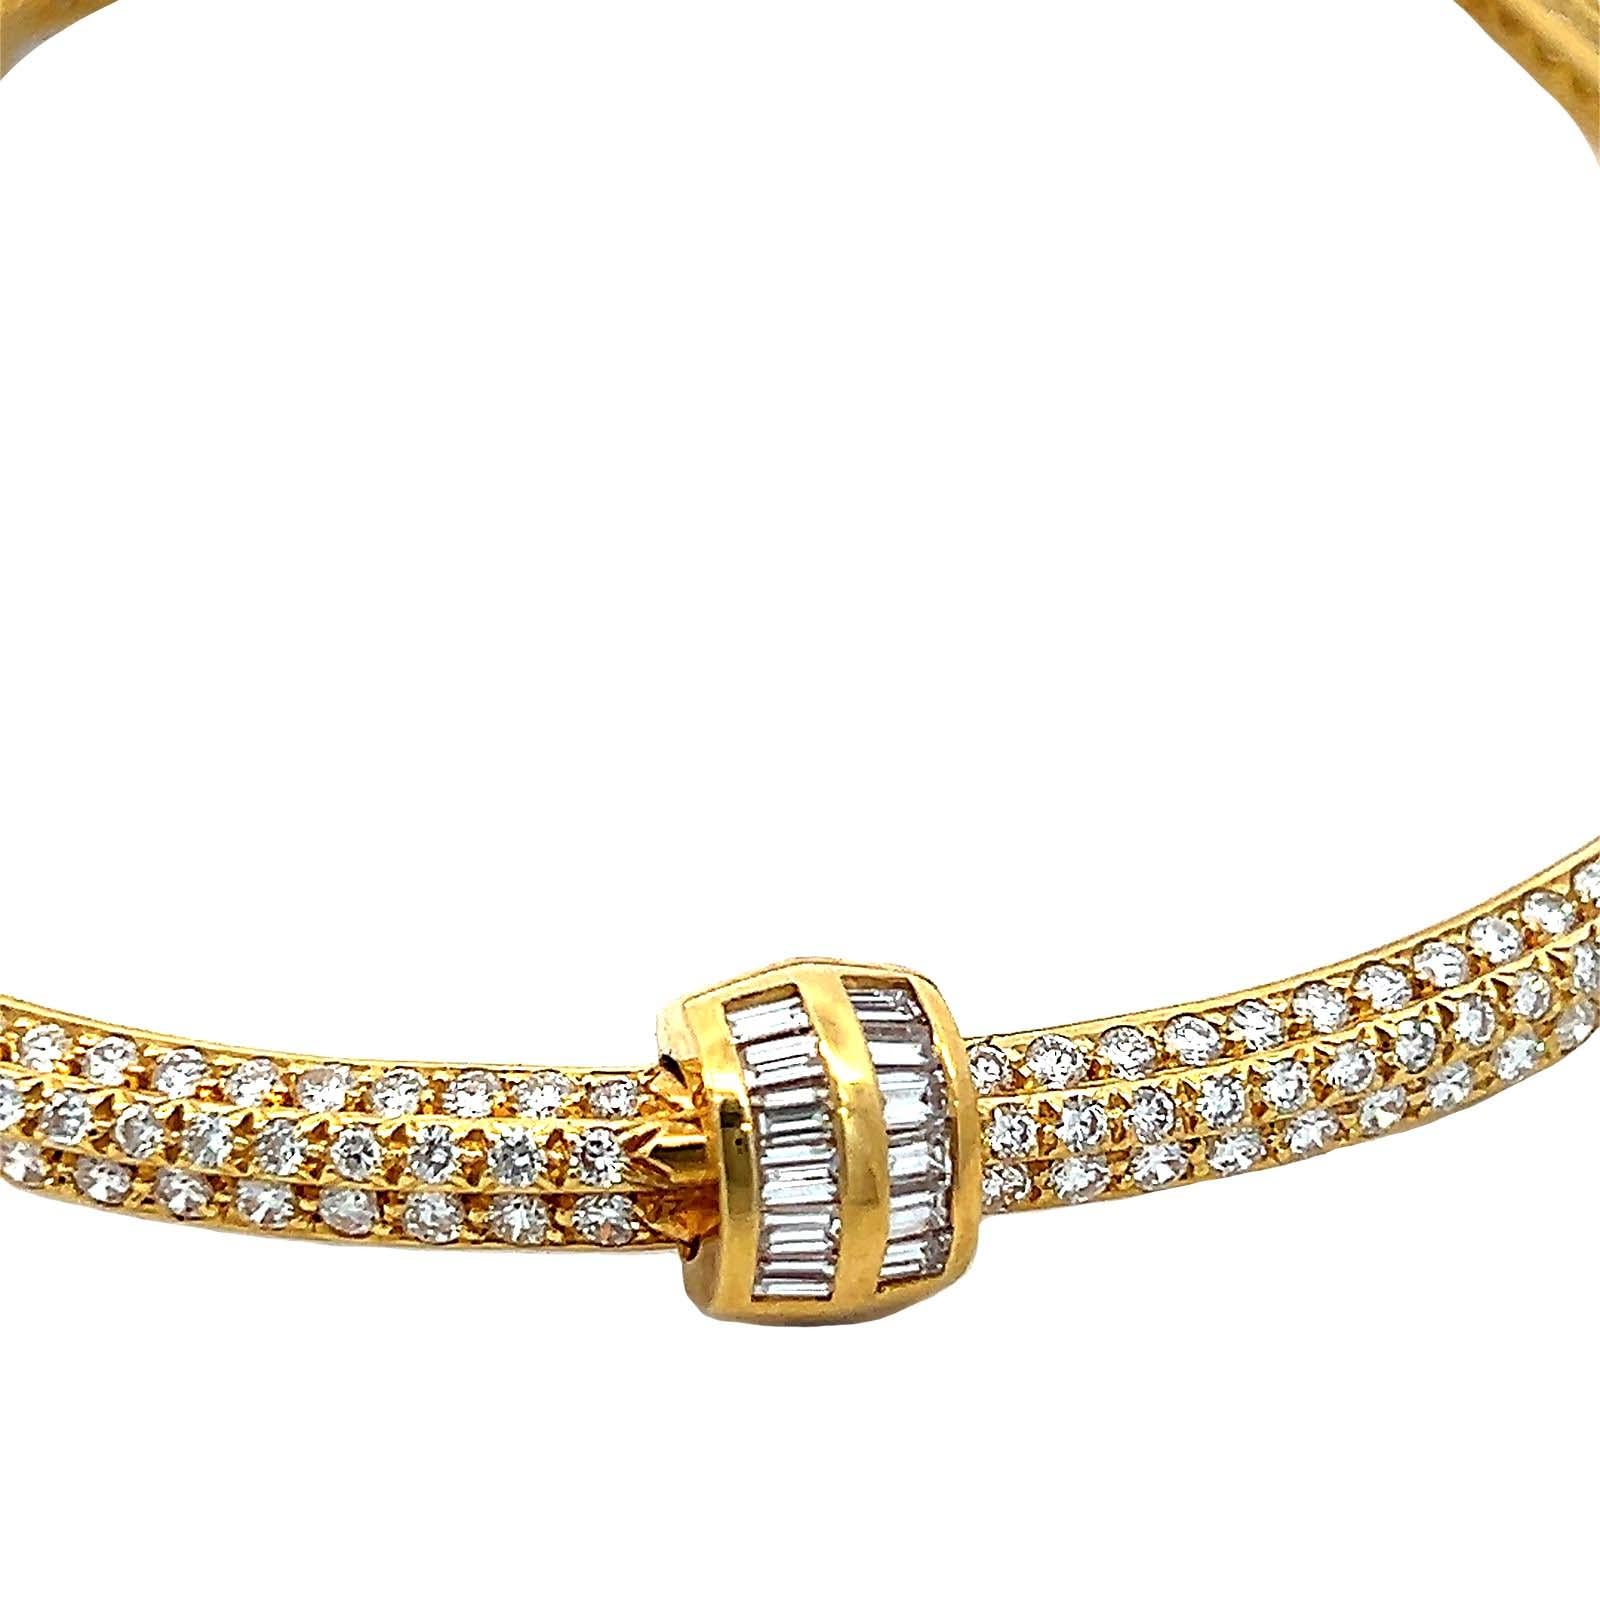 H. Stern, 18-karat yellow gold choker necklace with 11.80 carats of high color, and H. Stern, 18-karat yellow gold choker necklace with 11.80 carats of high color and clarity white diamonds.   The exceptional craftsmanship and undeniable beauty are